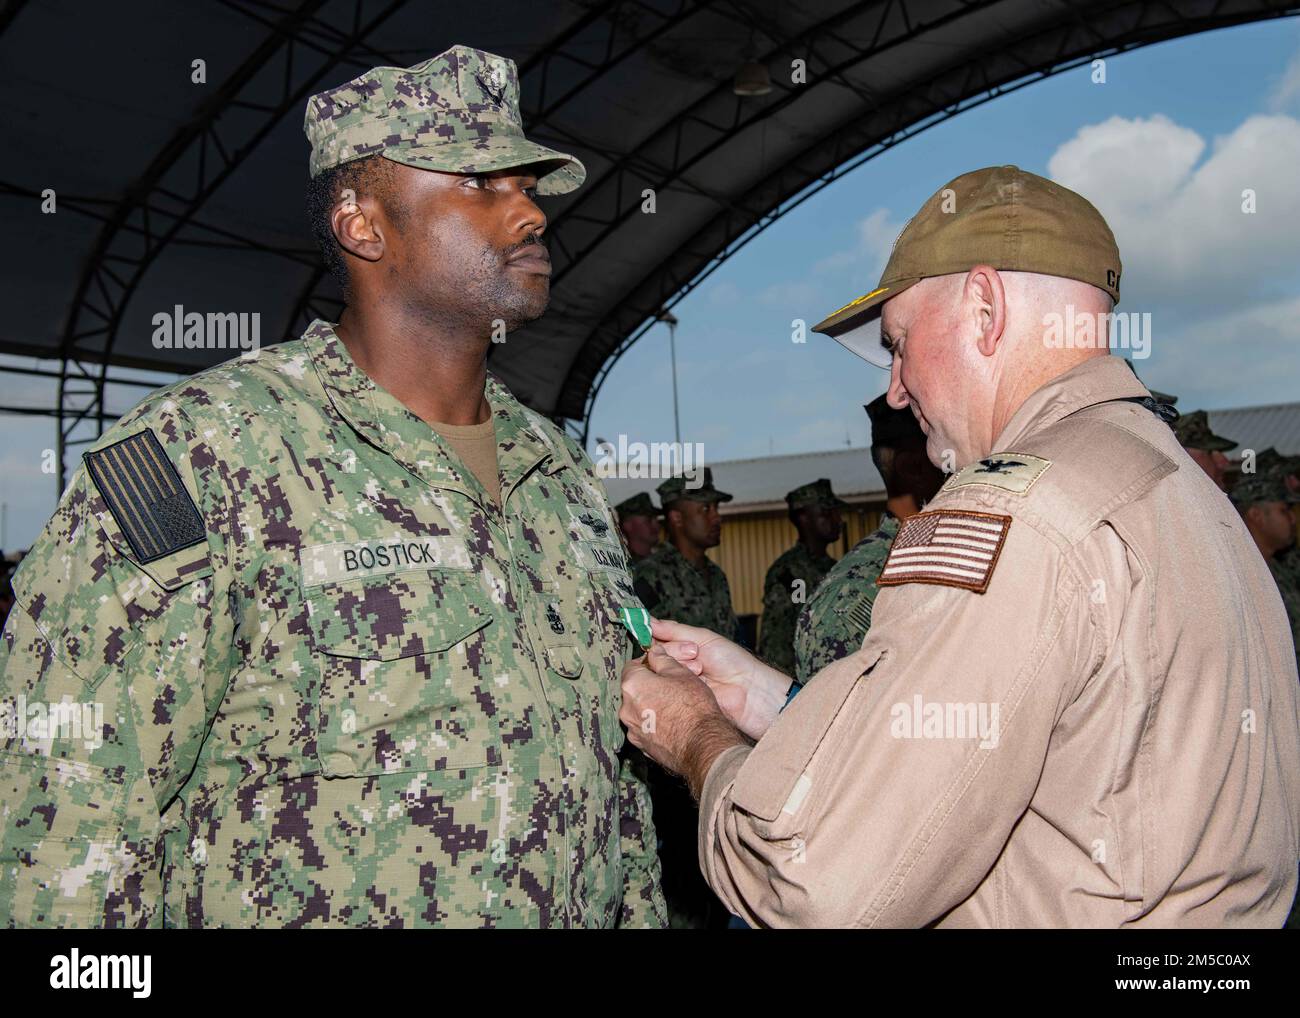 U.S. Navy Chief Hospital Corpsman Kevin Bostick, a Sailor from Washington, is presented The Navy and Marine Corps Commendation Medal by Capt. David Faehnle, the commanding officer of Camp Lemonnier, Djibouti during a ceremony held on camp February 25th. Stock Photo